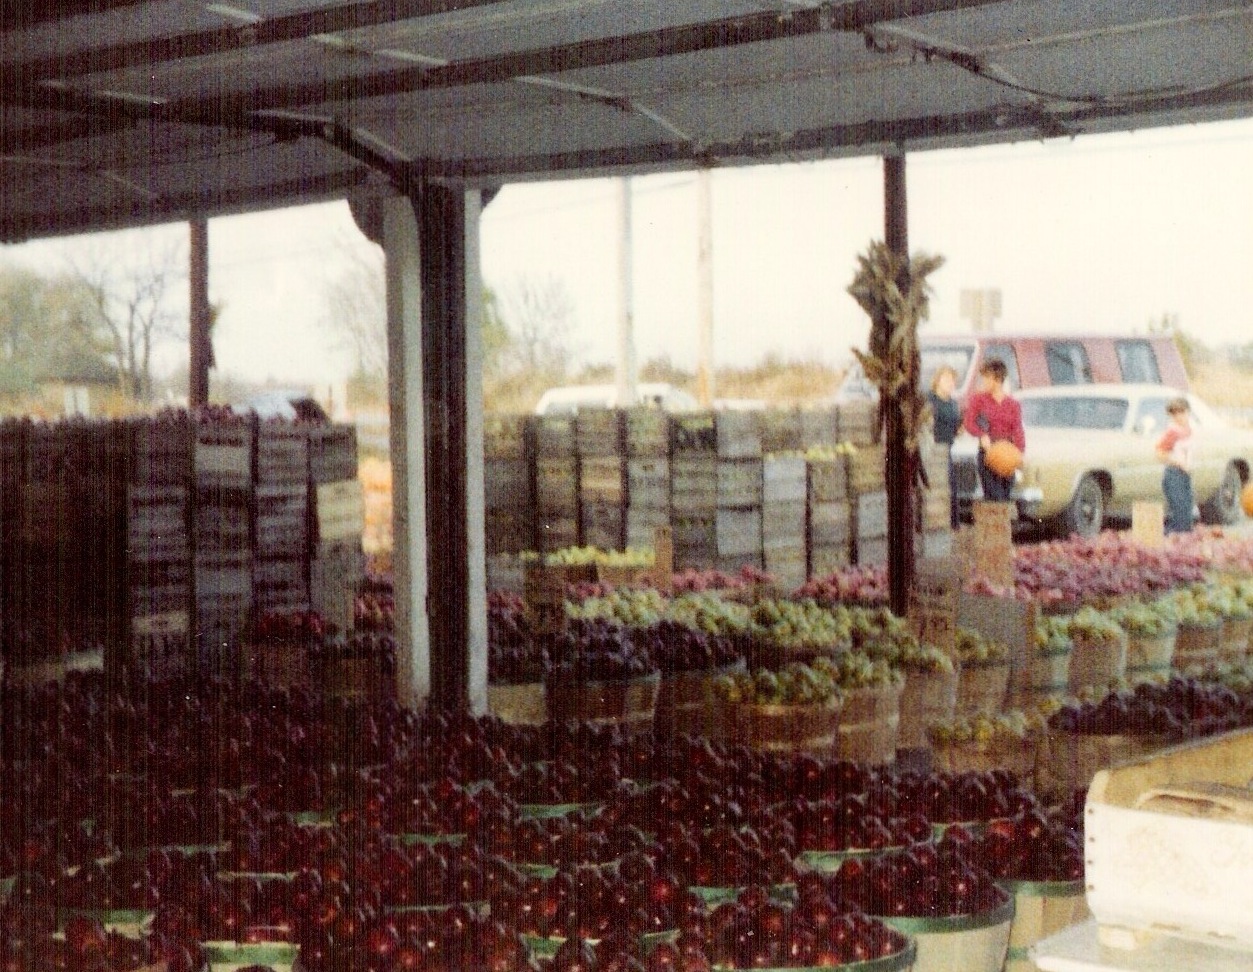 Apple Season at Bob's Farm Stand on Torrence, late 1970s